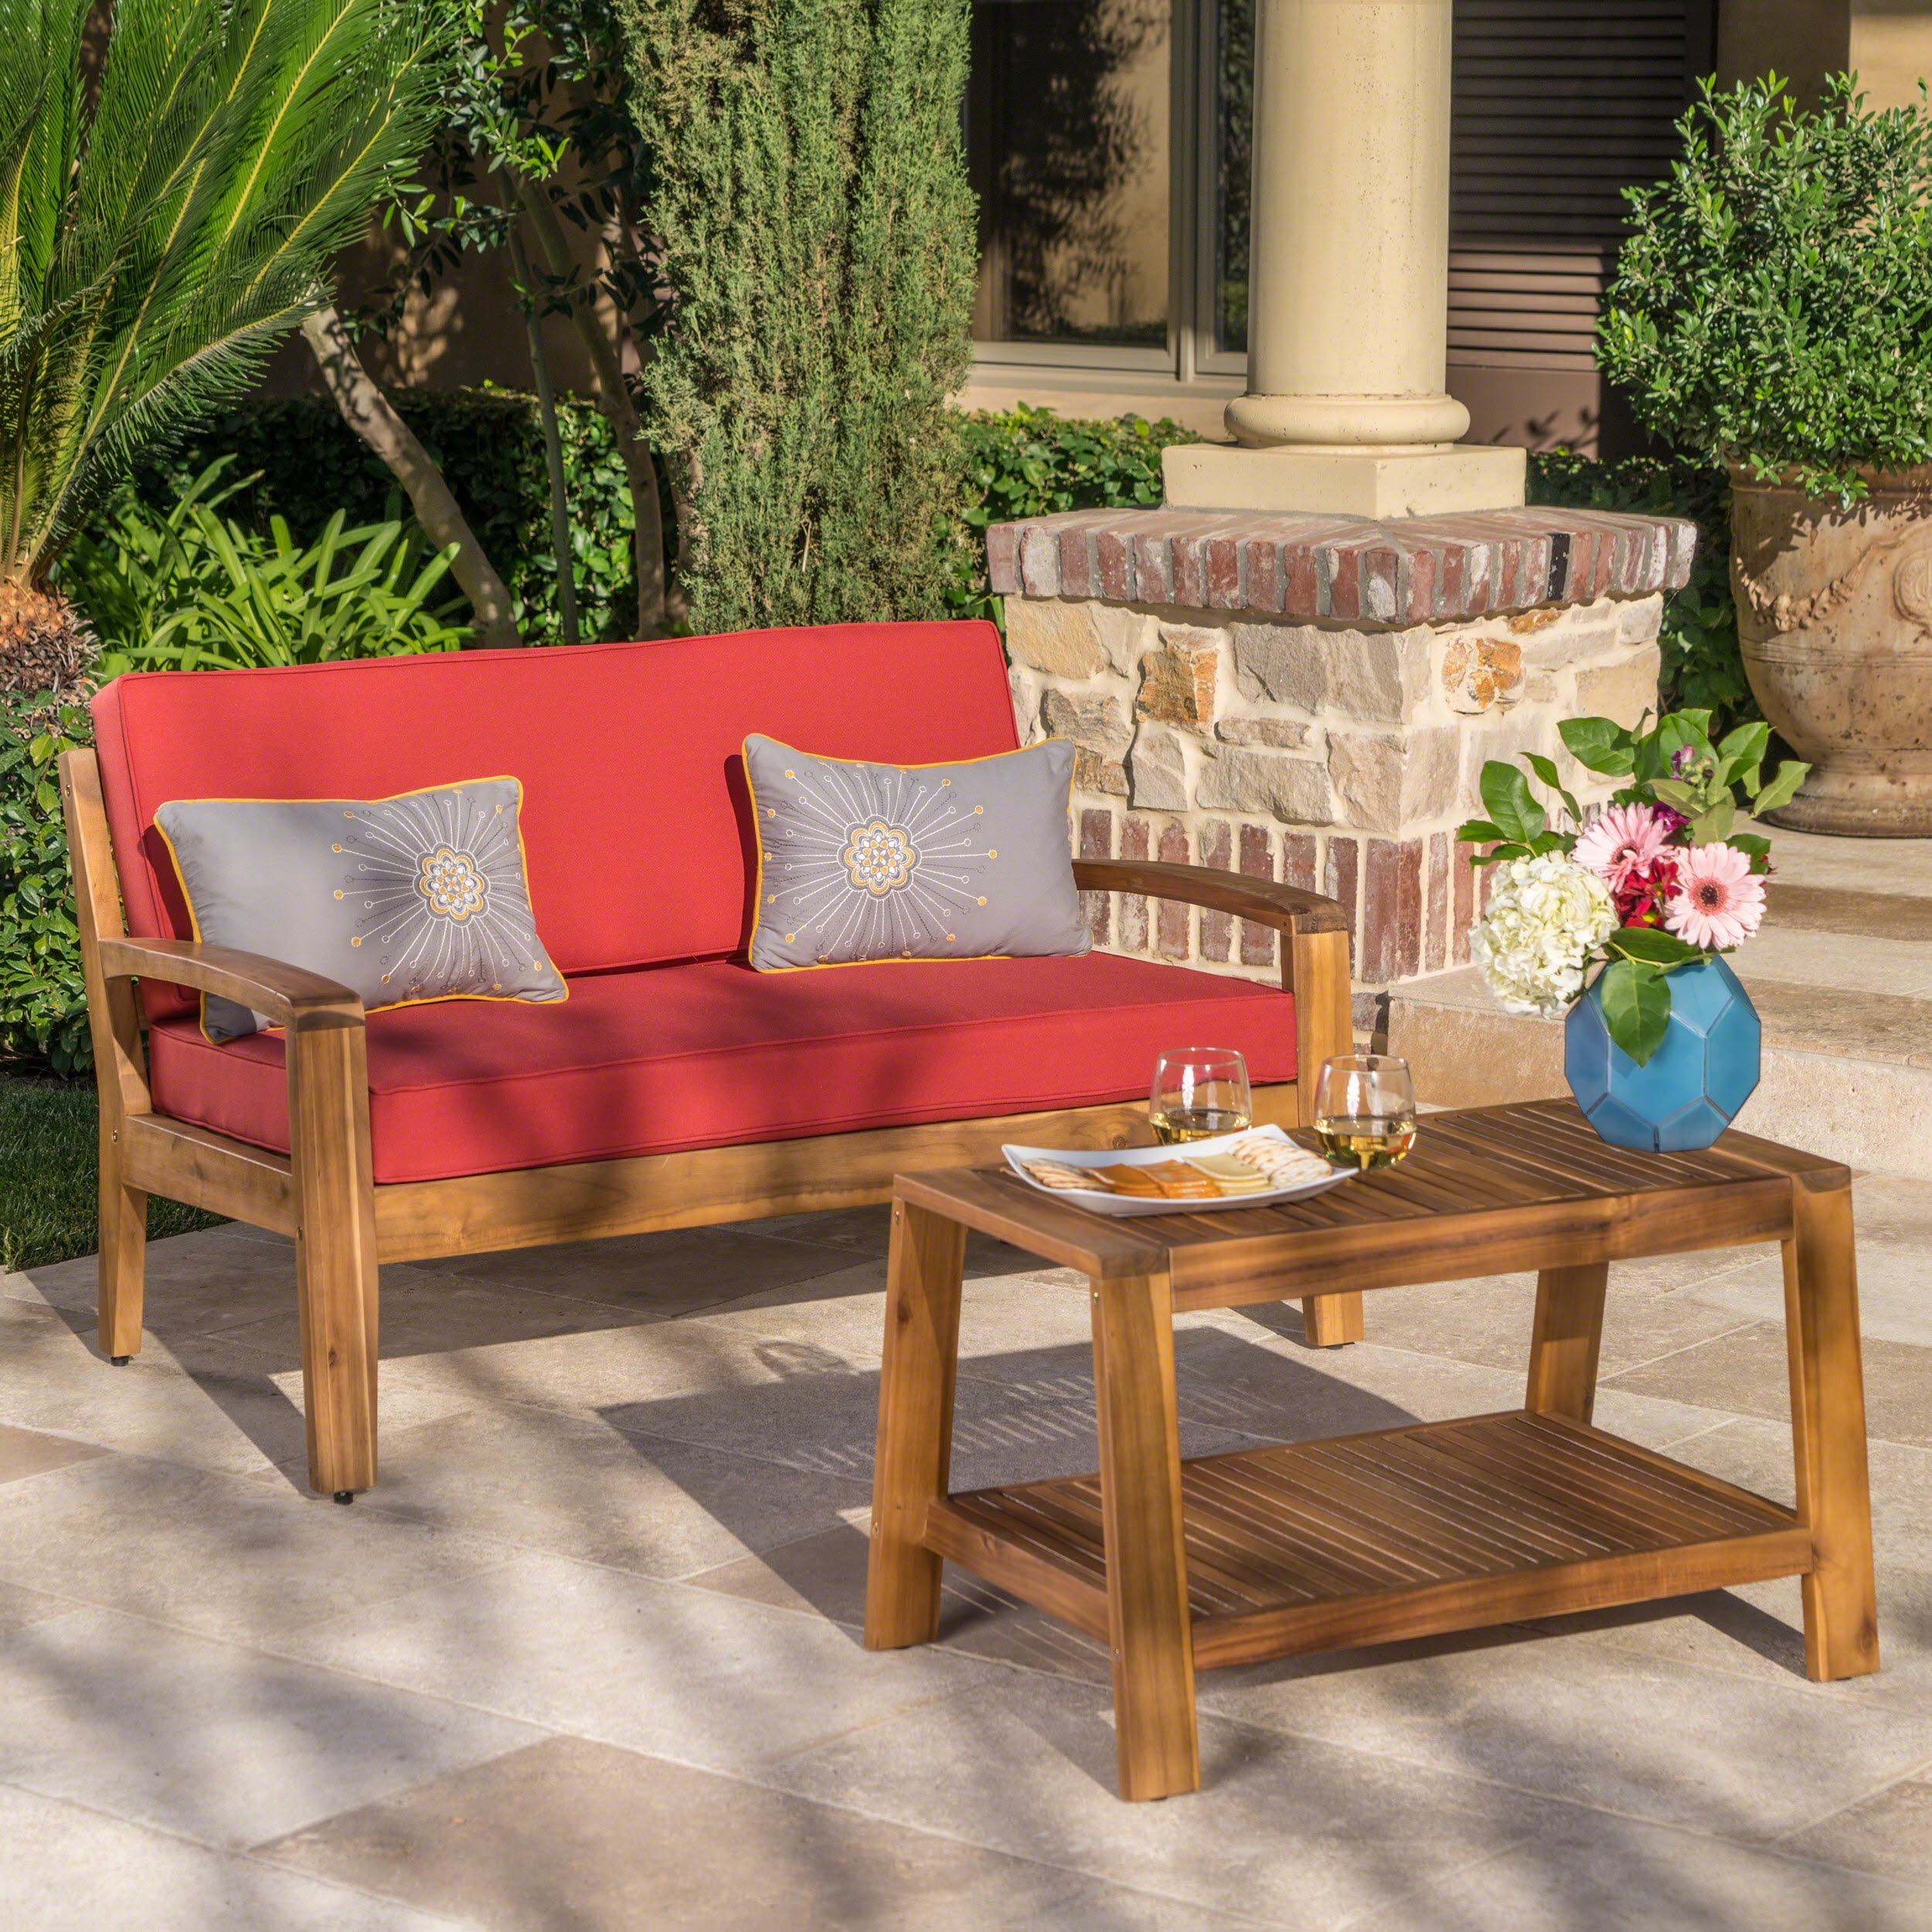 Featured image of post Red Coffee Table Walmart : Coffee table and two side table set.